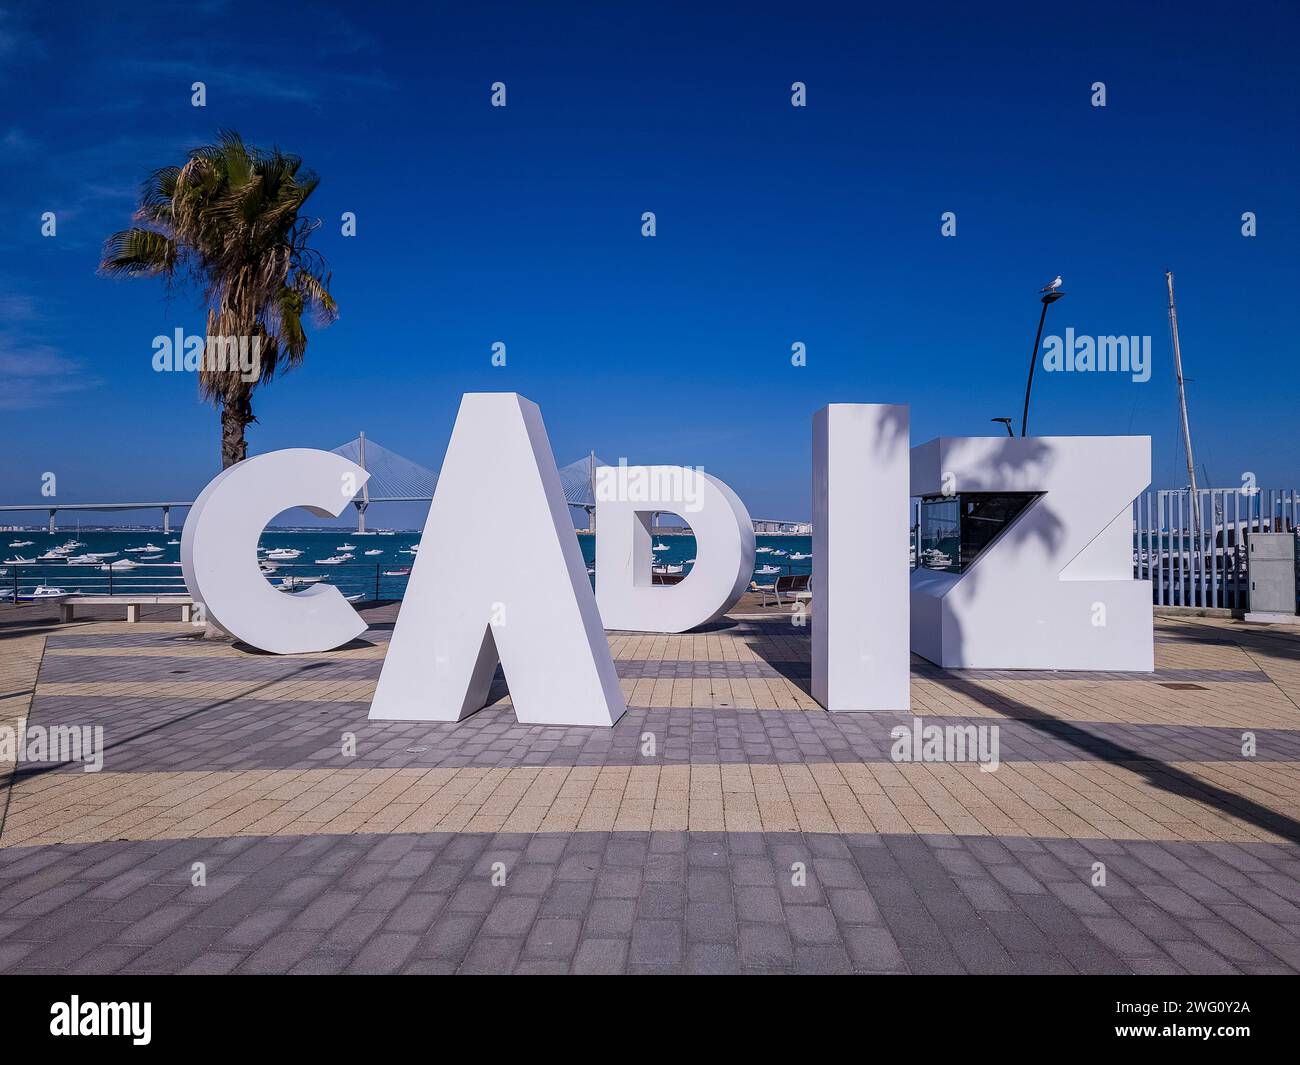 The word Cadiz, on the promenade of the city of Cadiz, Andalusia, Spain Stock Photo